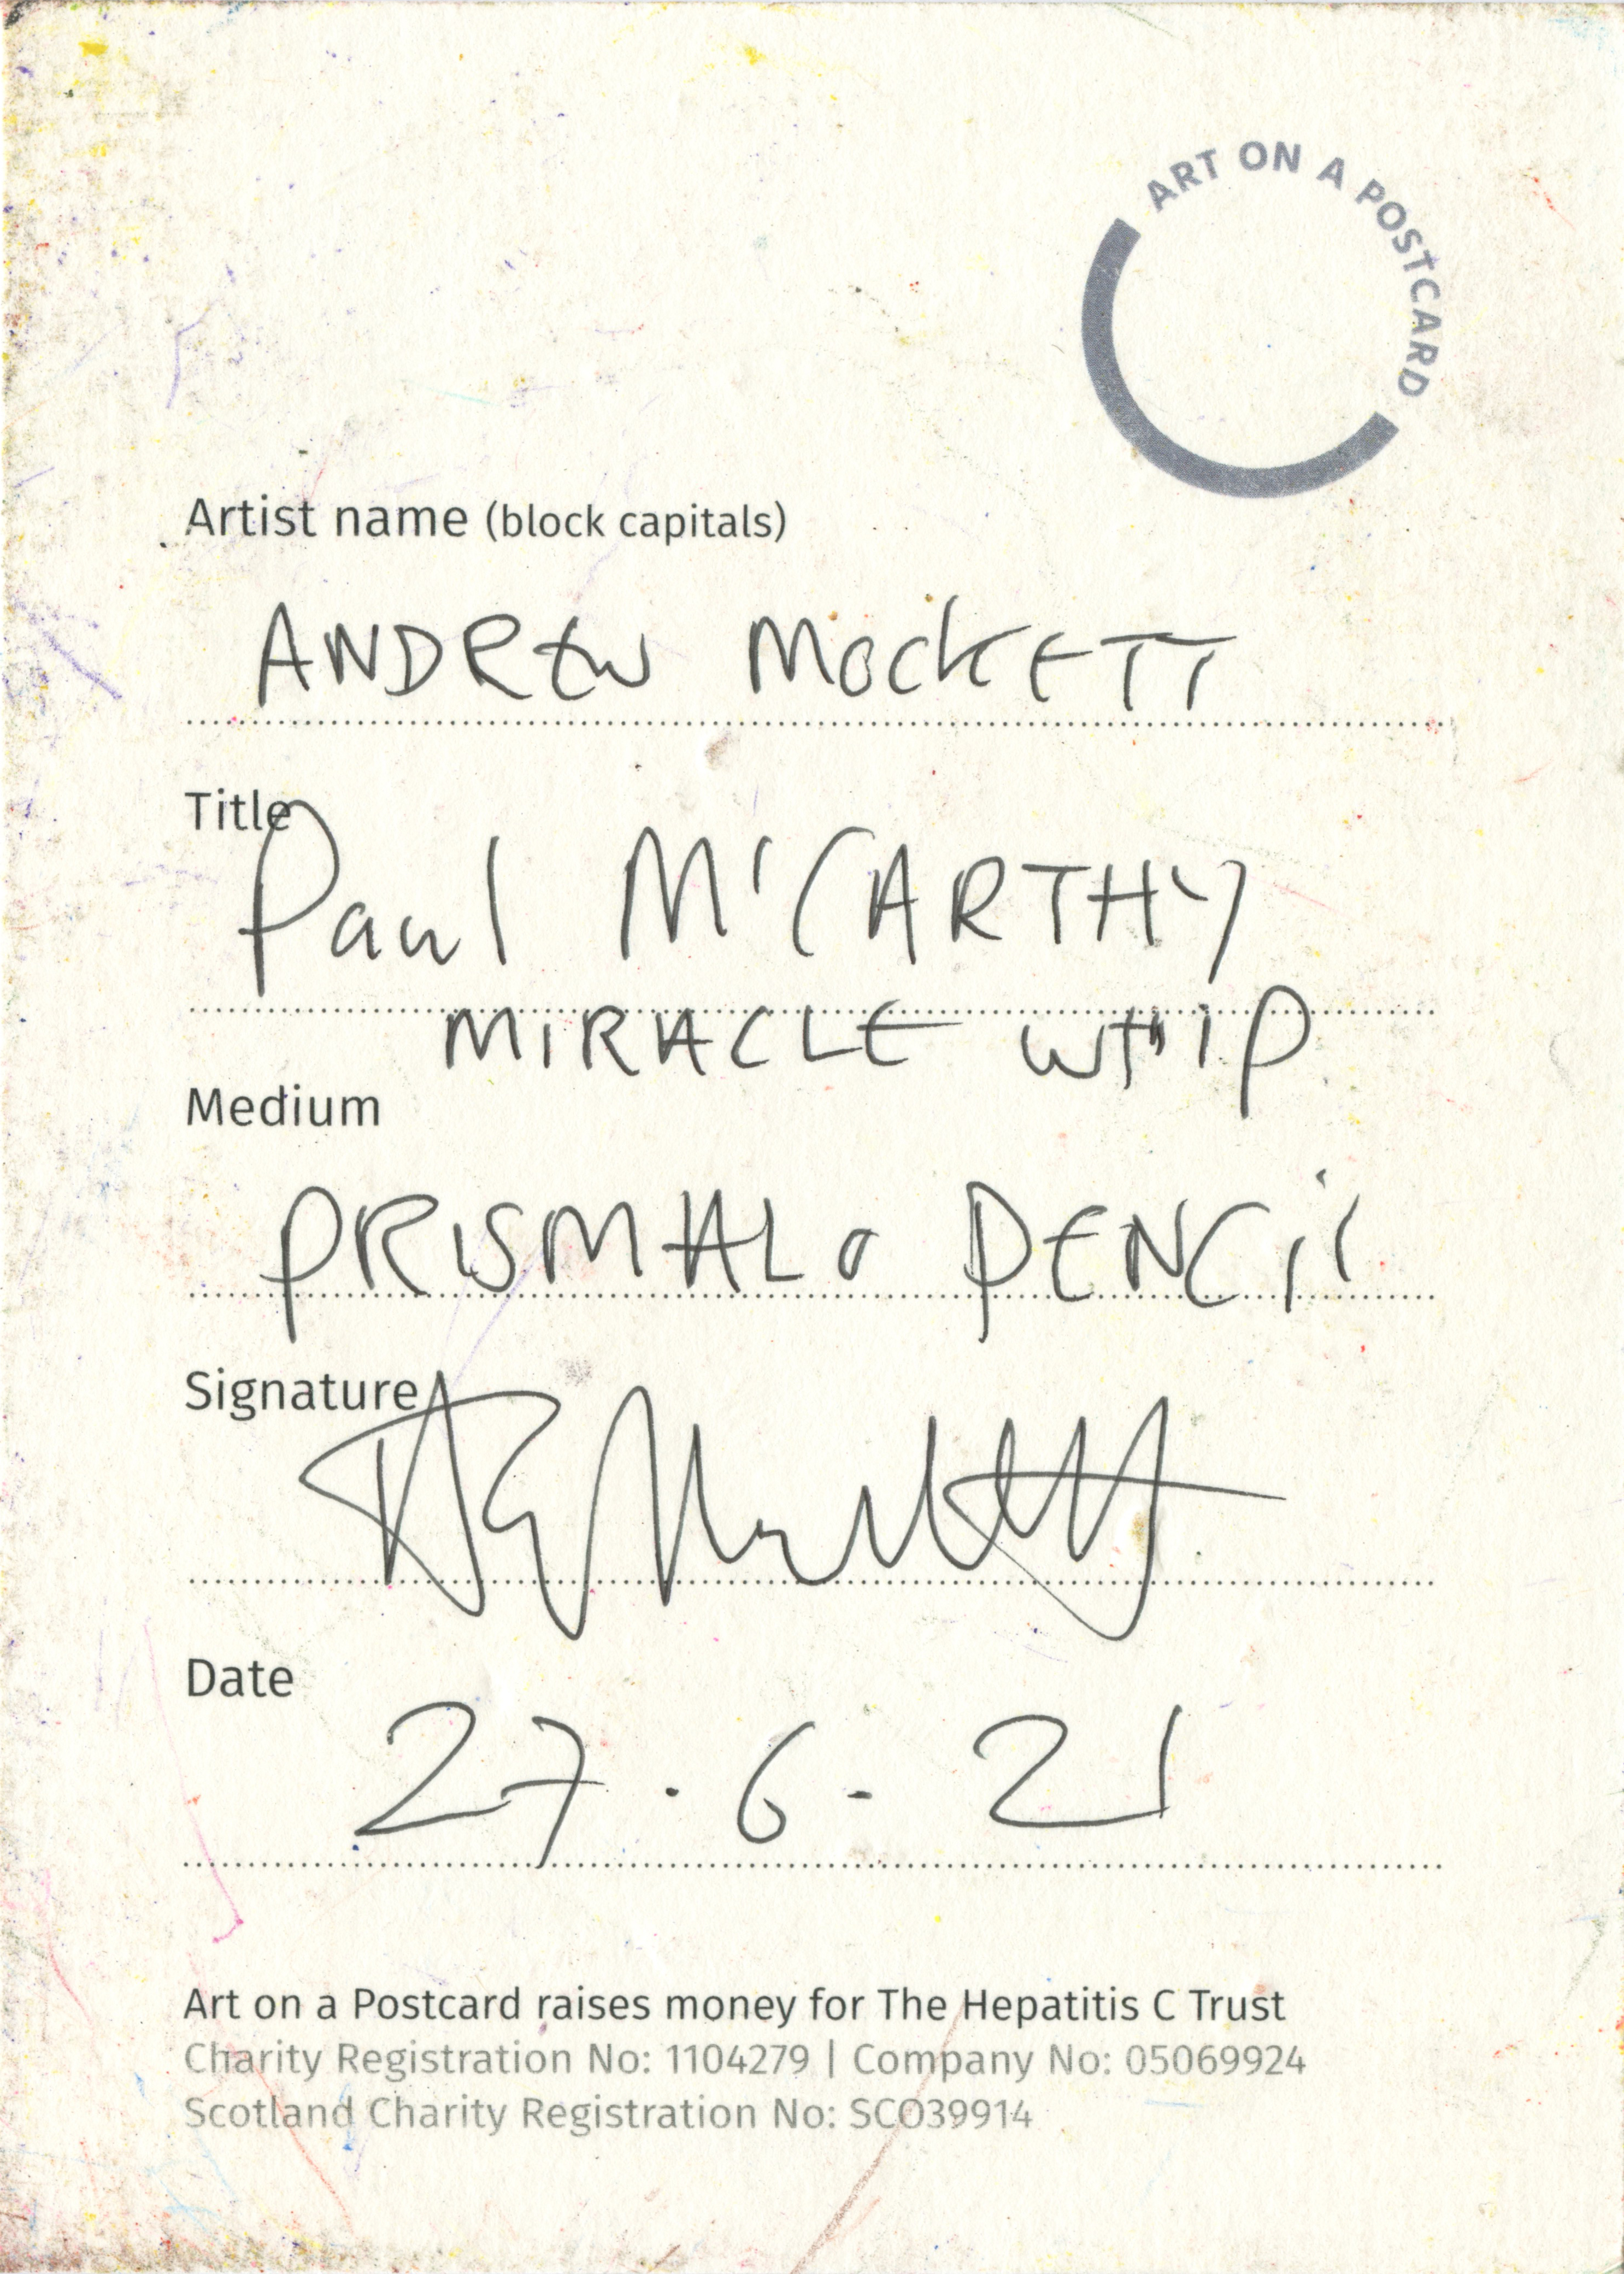 PAUL MCCARTHY MIRACLE WHIP - back